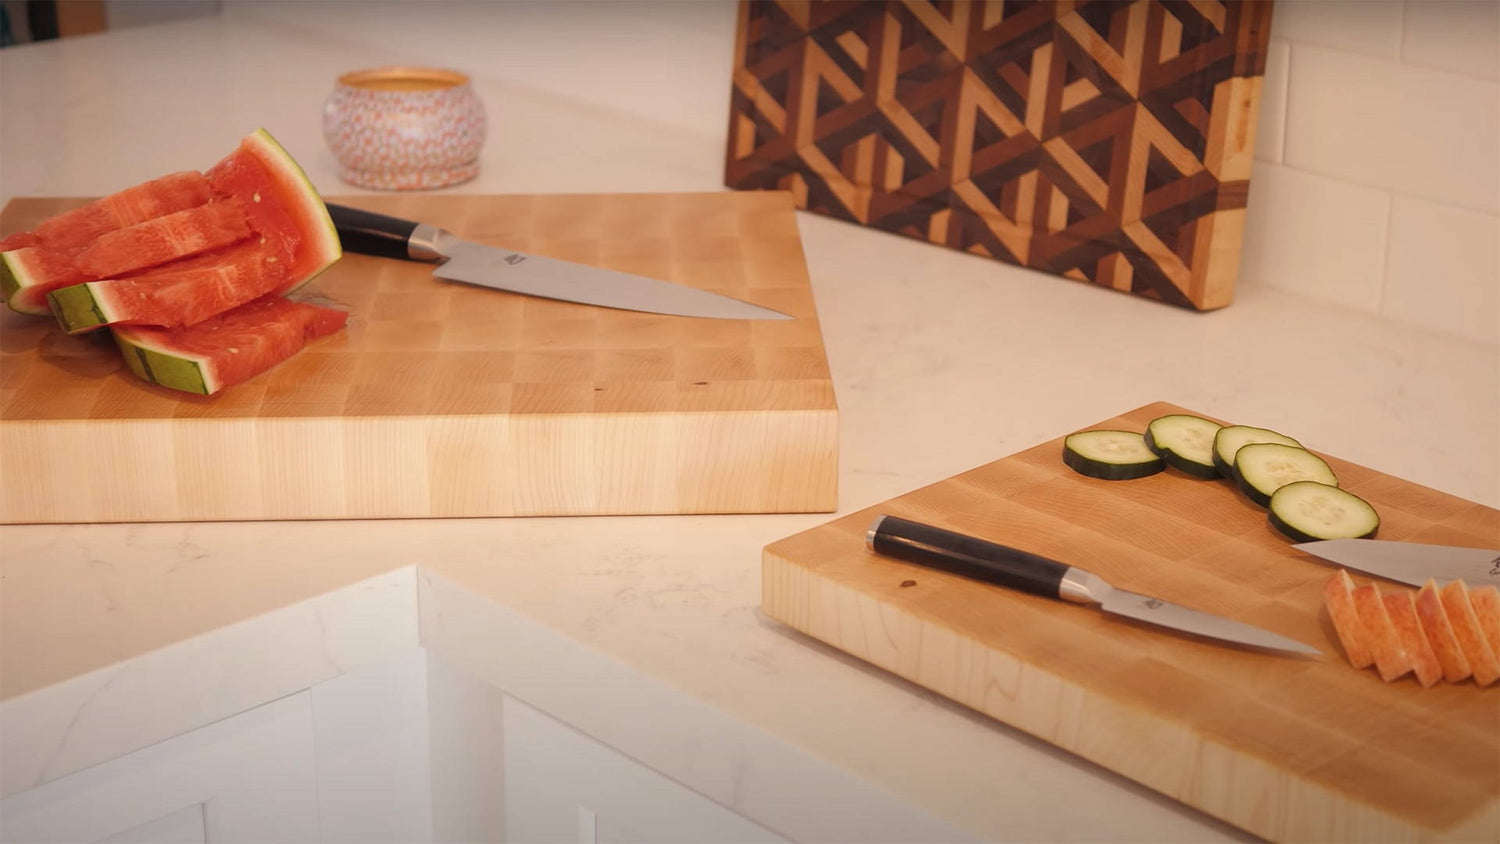 How to Build End Grain Cutting Boards: Make Money Woodworking with this Simple Design